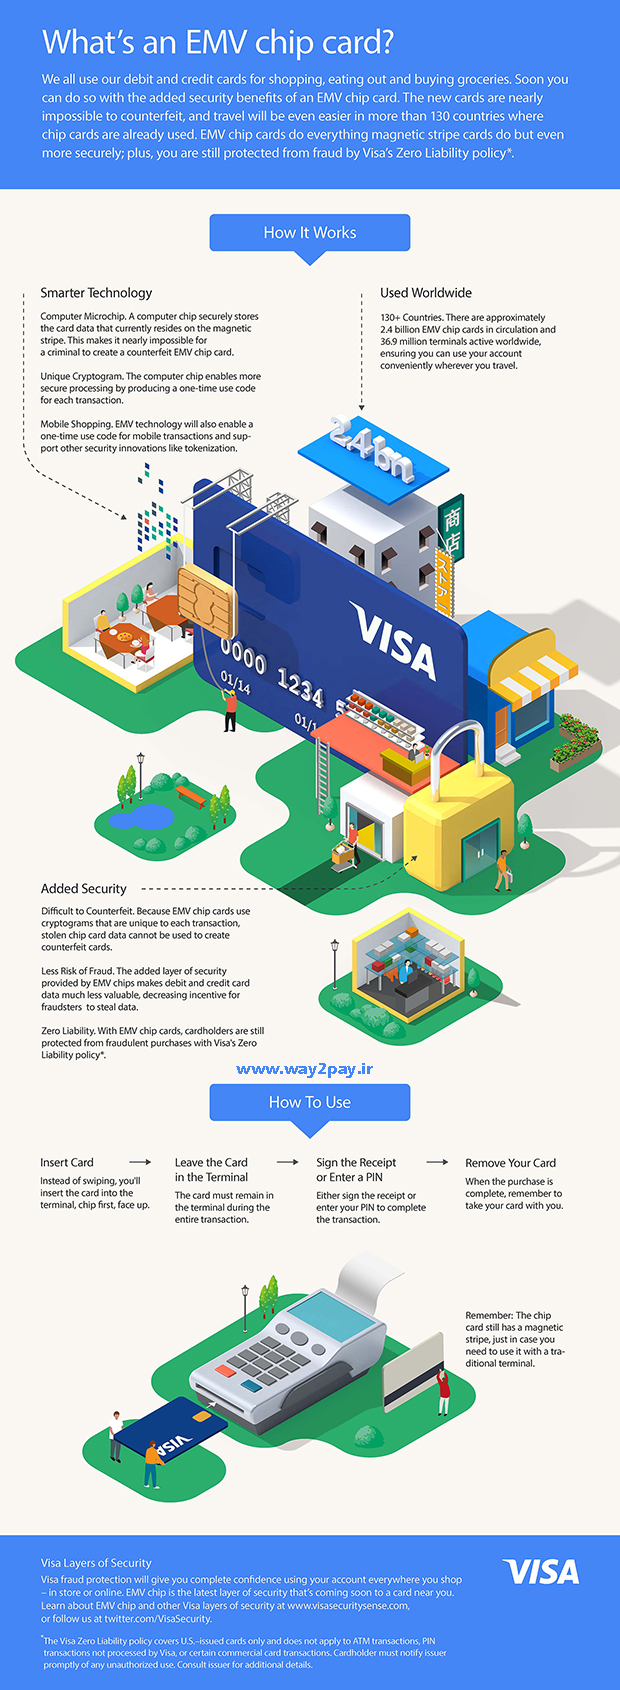 emv-infographic-visa-small-index-way2pay-94-07-28